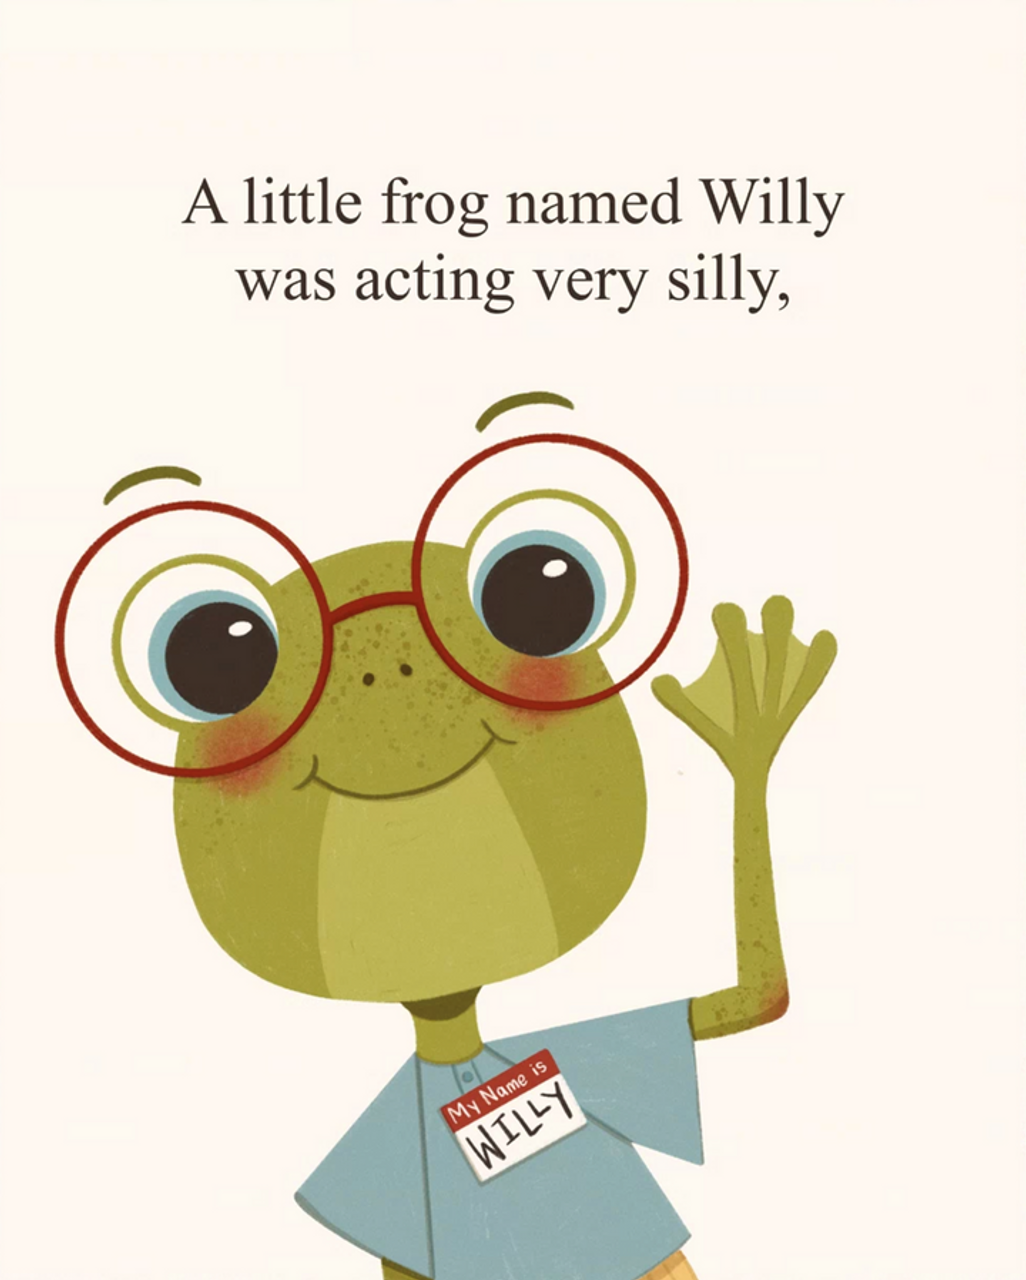 Silly Willy (Paperback)* 